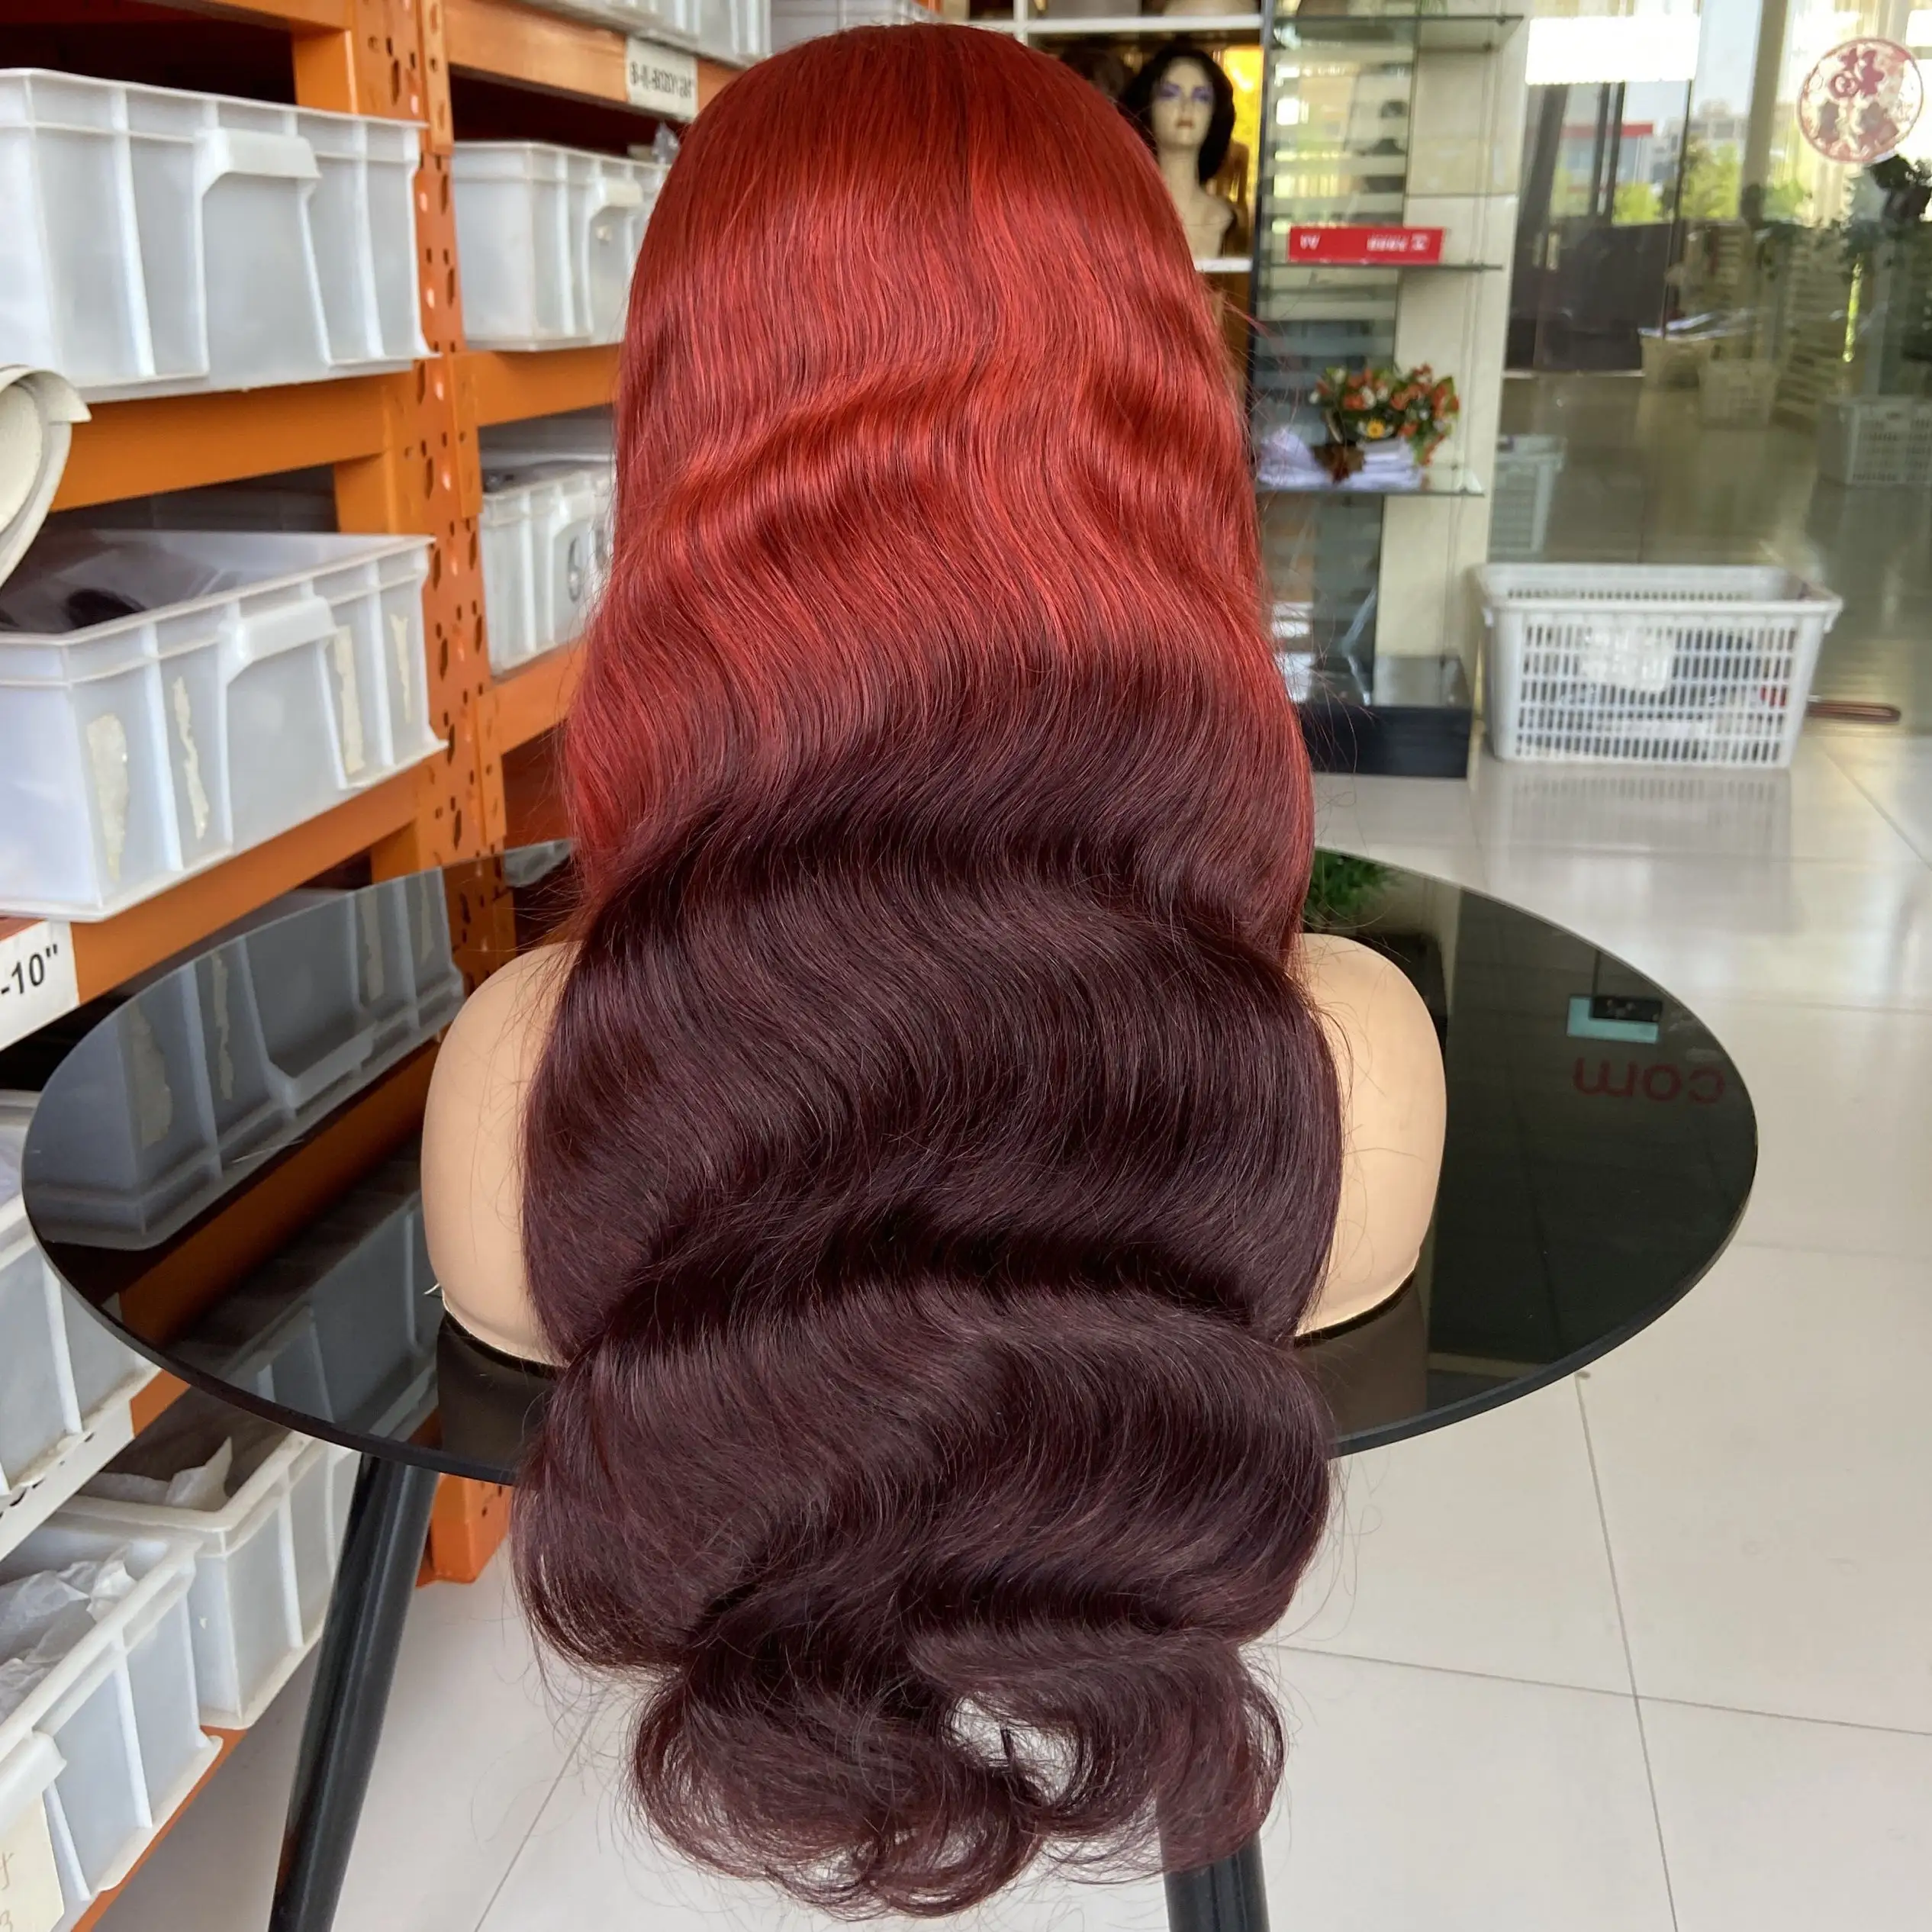 Customized Ombre Colored Human Hair Wigs Lace Front Body Wave Human Hair Wigs For Women Ombre 13x4 Lace Frontal Wigs Pre Pluck